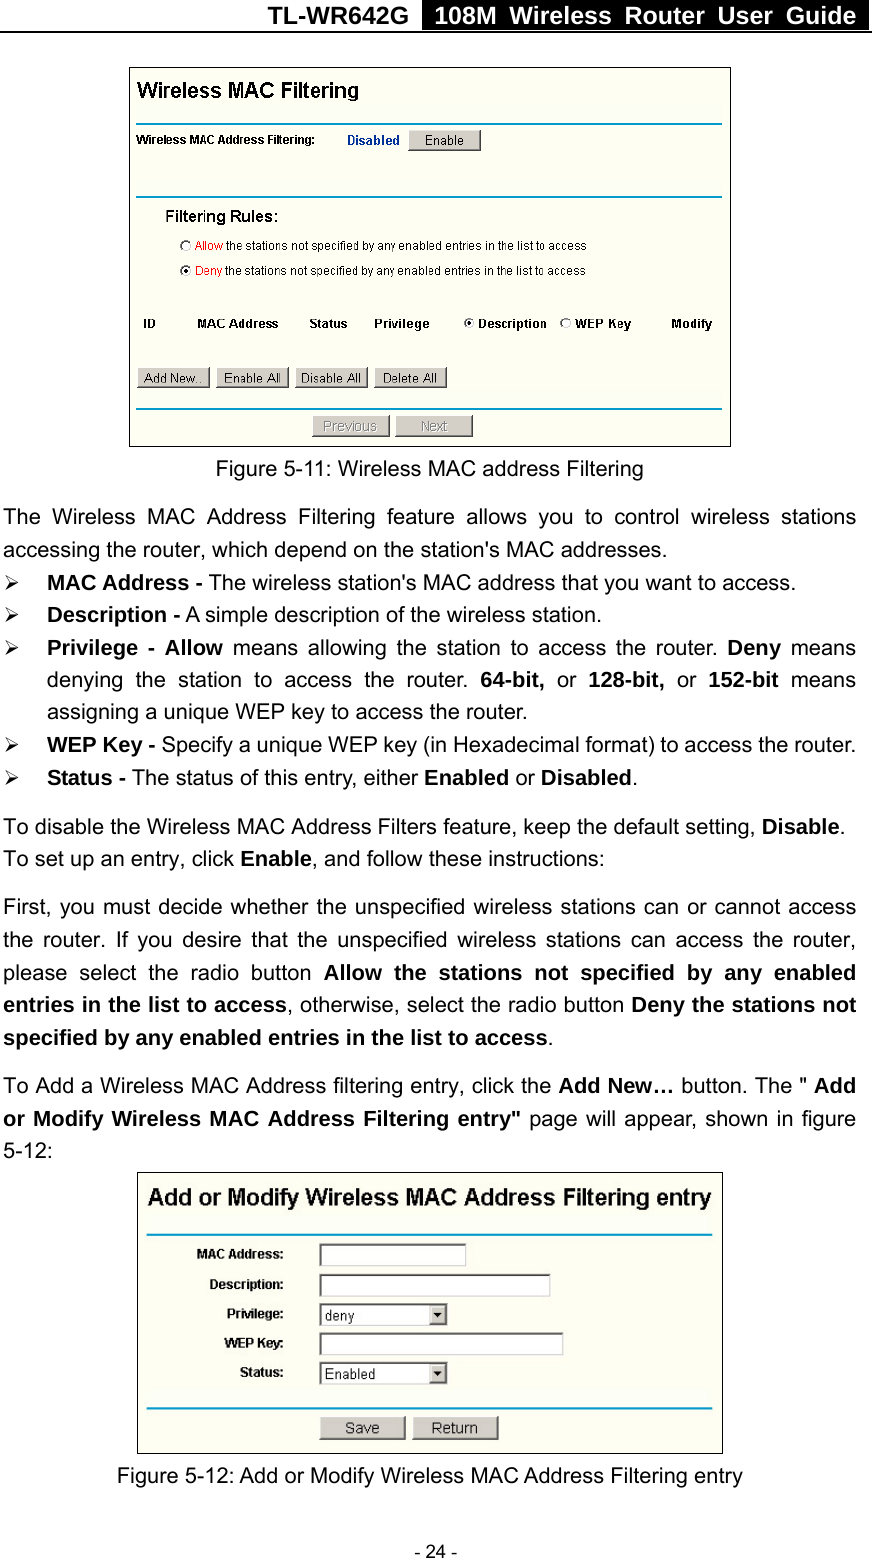 TL-WR642G   108M Wireless Router User Guide   - 24 -  Figure 5-11: Wireless MAC address Filtering The Wireless MAC Address Filtering feature allows you to control wireless stations accessing the router, which depend on the station&apos;s MAC addresses.   ¾ MAC Address - The wireless station&apos;s MAC address that you want to access.   ¾ Description - A simple description of the wireless station.   ¾ Privilege - Allow means allowing the station to access the router. Deny means denying the station to access the router. 64-bit, or 128-bit, or 152-bit  means assigning a unique WEP key to access the router.   ¾ WEP Key - Specify a unique WEP key (in Hexadecimal format) to access the router.   ¾ Status - The status of this entry, either Enabled or Disabled. To disable the Wireless MAC Address Filters feature, keep the default setting, Disable. To set up an entry, click Enable, and follow these instructions:   First, you must decide whether the unspecified wireless stations can or cannot access the router. If you desire that the unspecified wireless stations can access the router, please select the radio button Allow the stations not specified by any enabled entries in the list to access, otherwise, select the radio button Deny the stations not specified by any enabled entries in the list to access. To Add a Wireless MAC Address filtering entry, click the Add New… button. The &quot; Add or Modify Wireless MAC Address Filtering entry&quot; page will appear, shown in figure 5-12:  Figure 5-12: Add or Modify Wireless MAC Address Filtering entry 